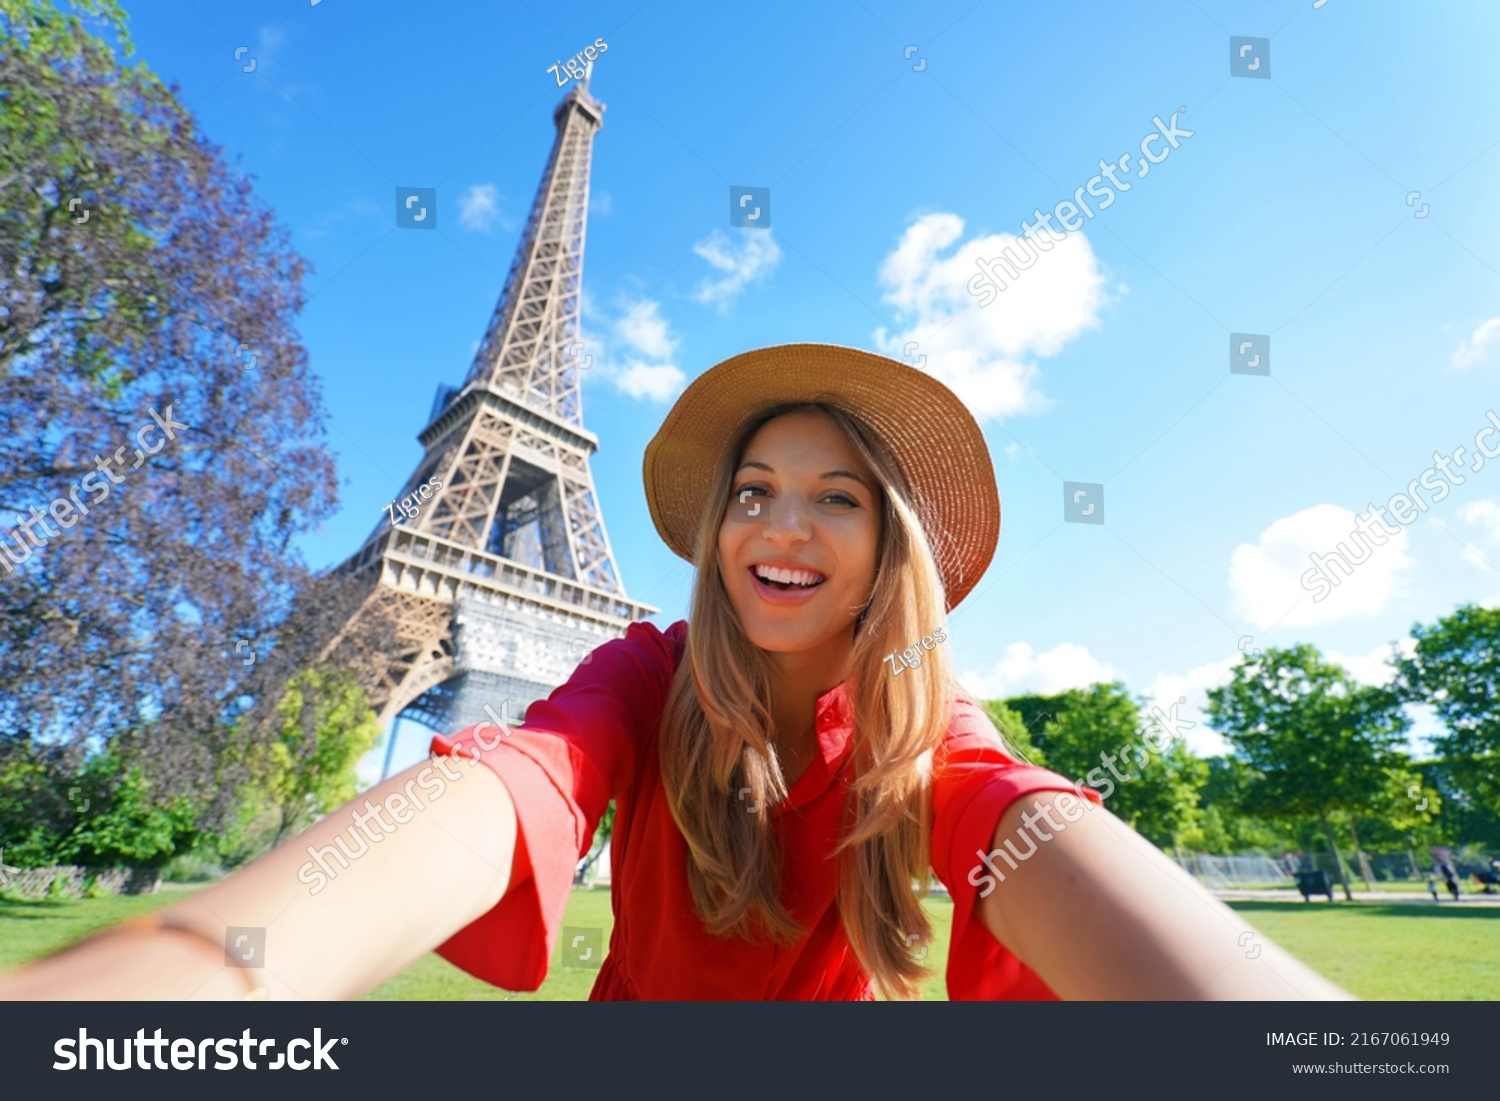 Selfie girl in Paris, France. Young tourist woman taking self portrait with Eiffel Tower in Paris. #2167061949